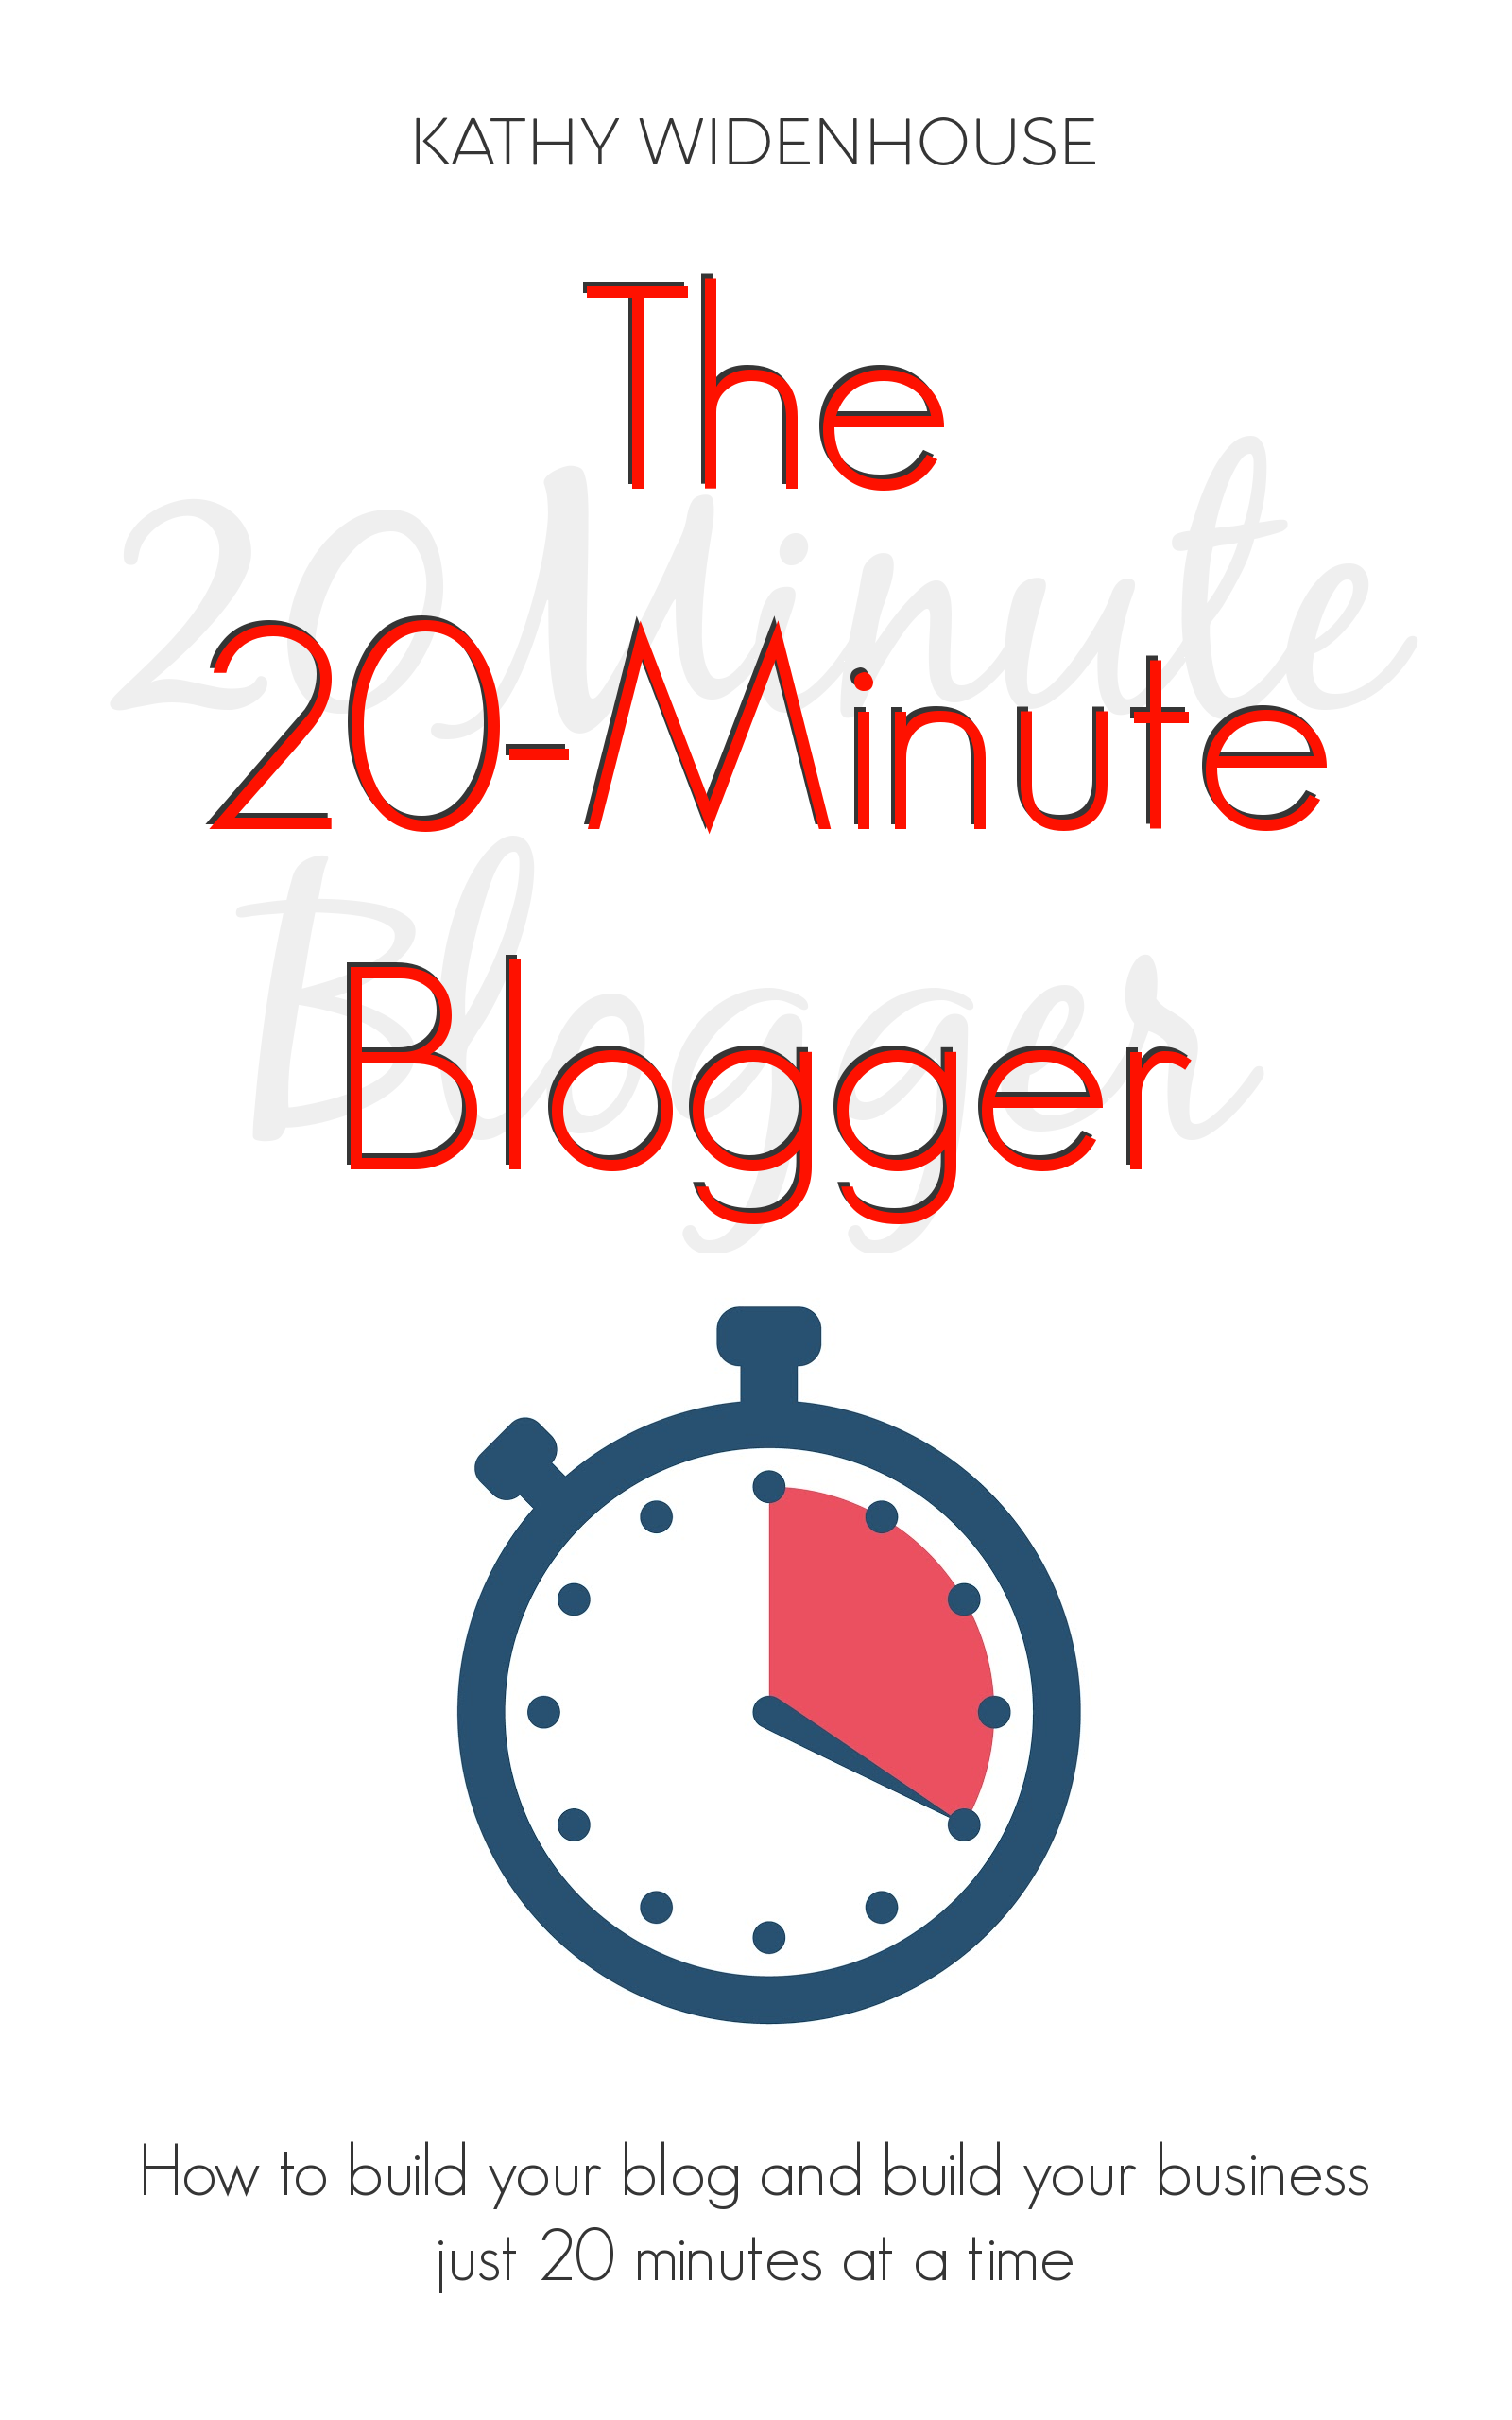 The 20-Minute Blogger: build your #blog just 20 minutes at a time with Word Wise at Nonprofit Copywriter #blogging #WritingTips